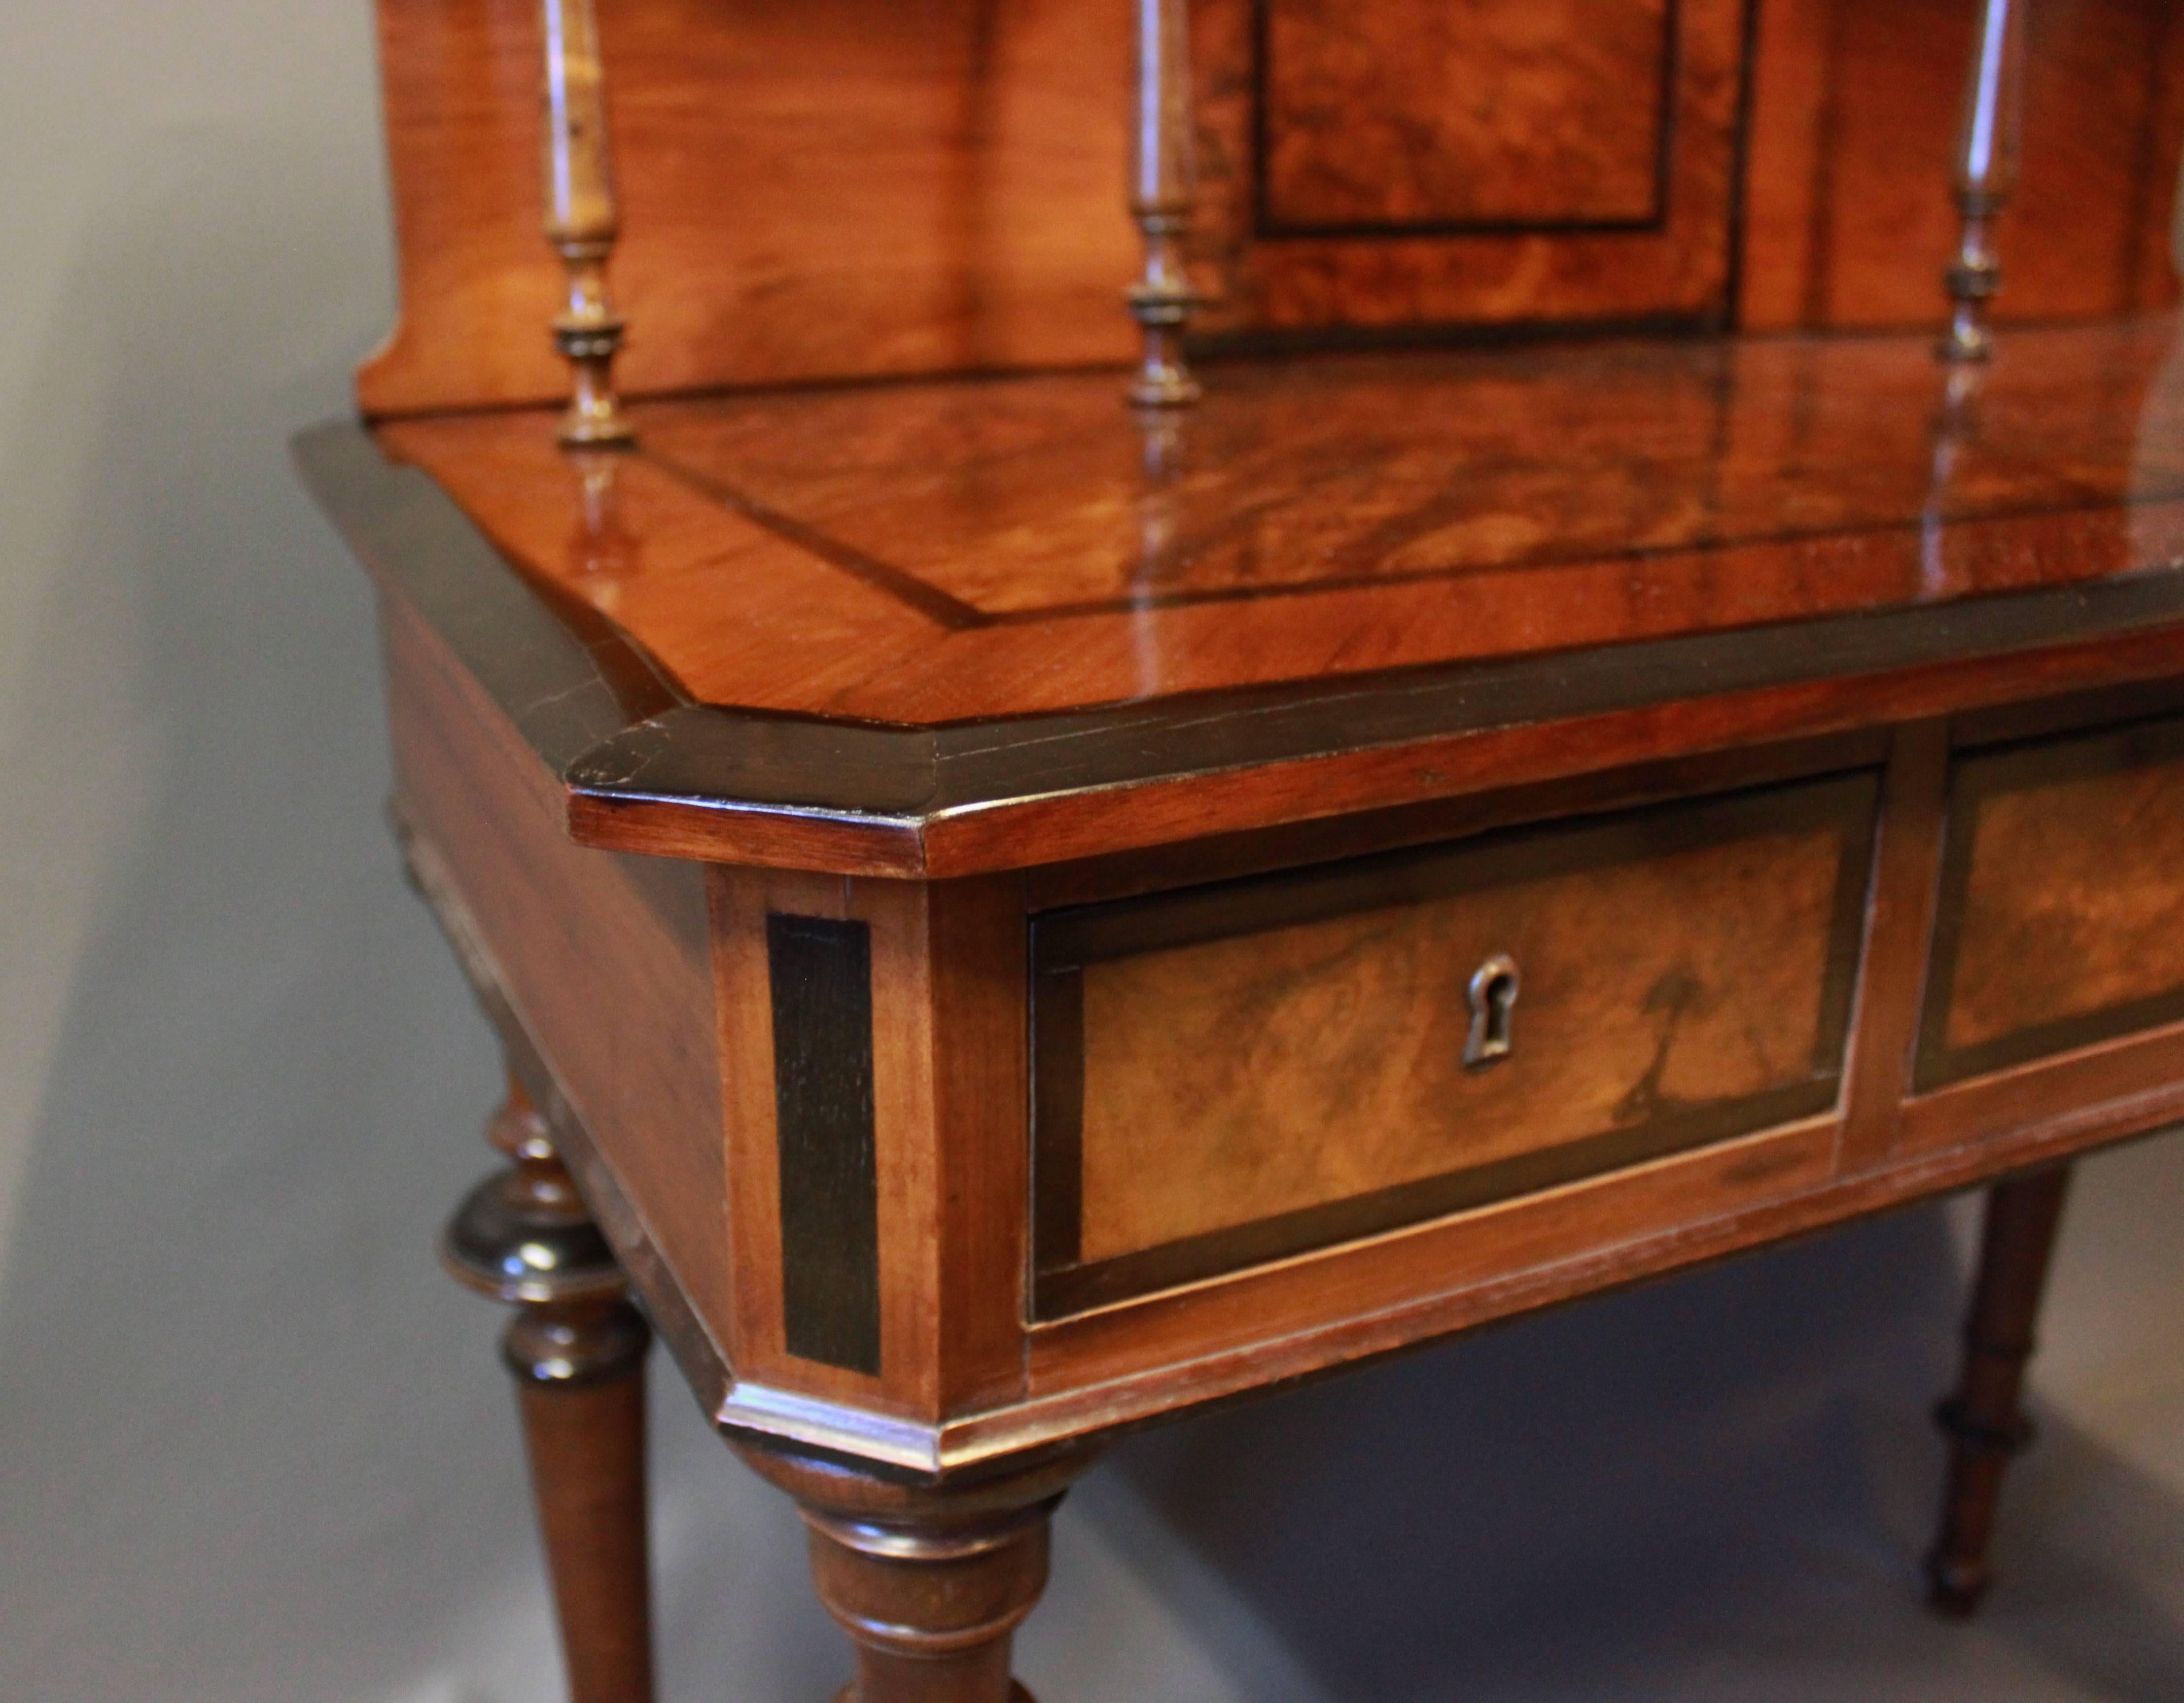 Other Ladies Desk in Handpolished Walnut from the 1860s